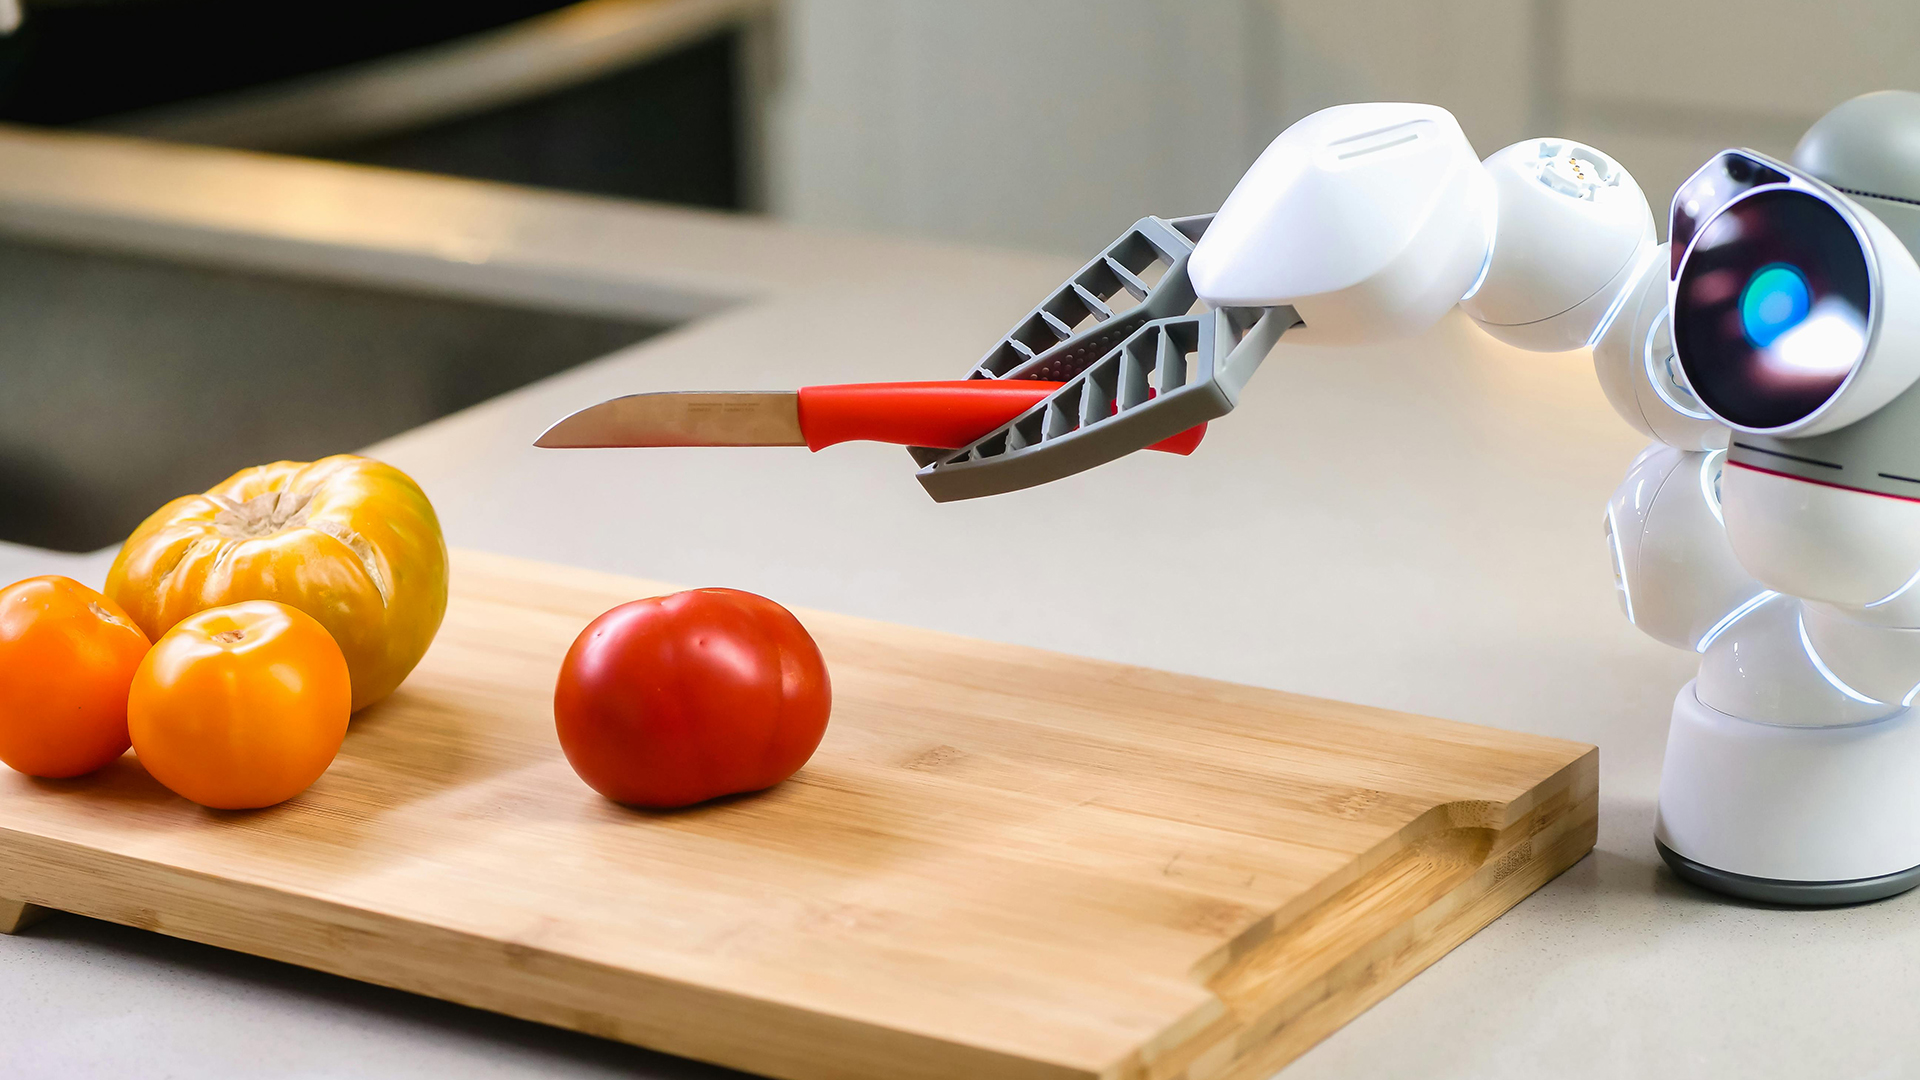 A small robot wields a knife and attempts to chop a red tomato